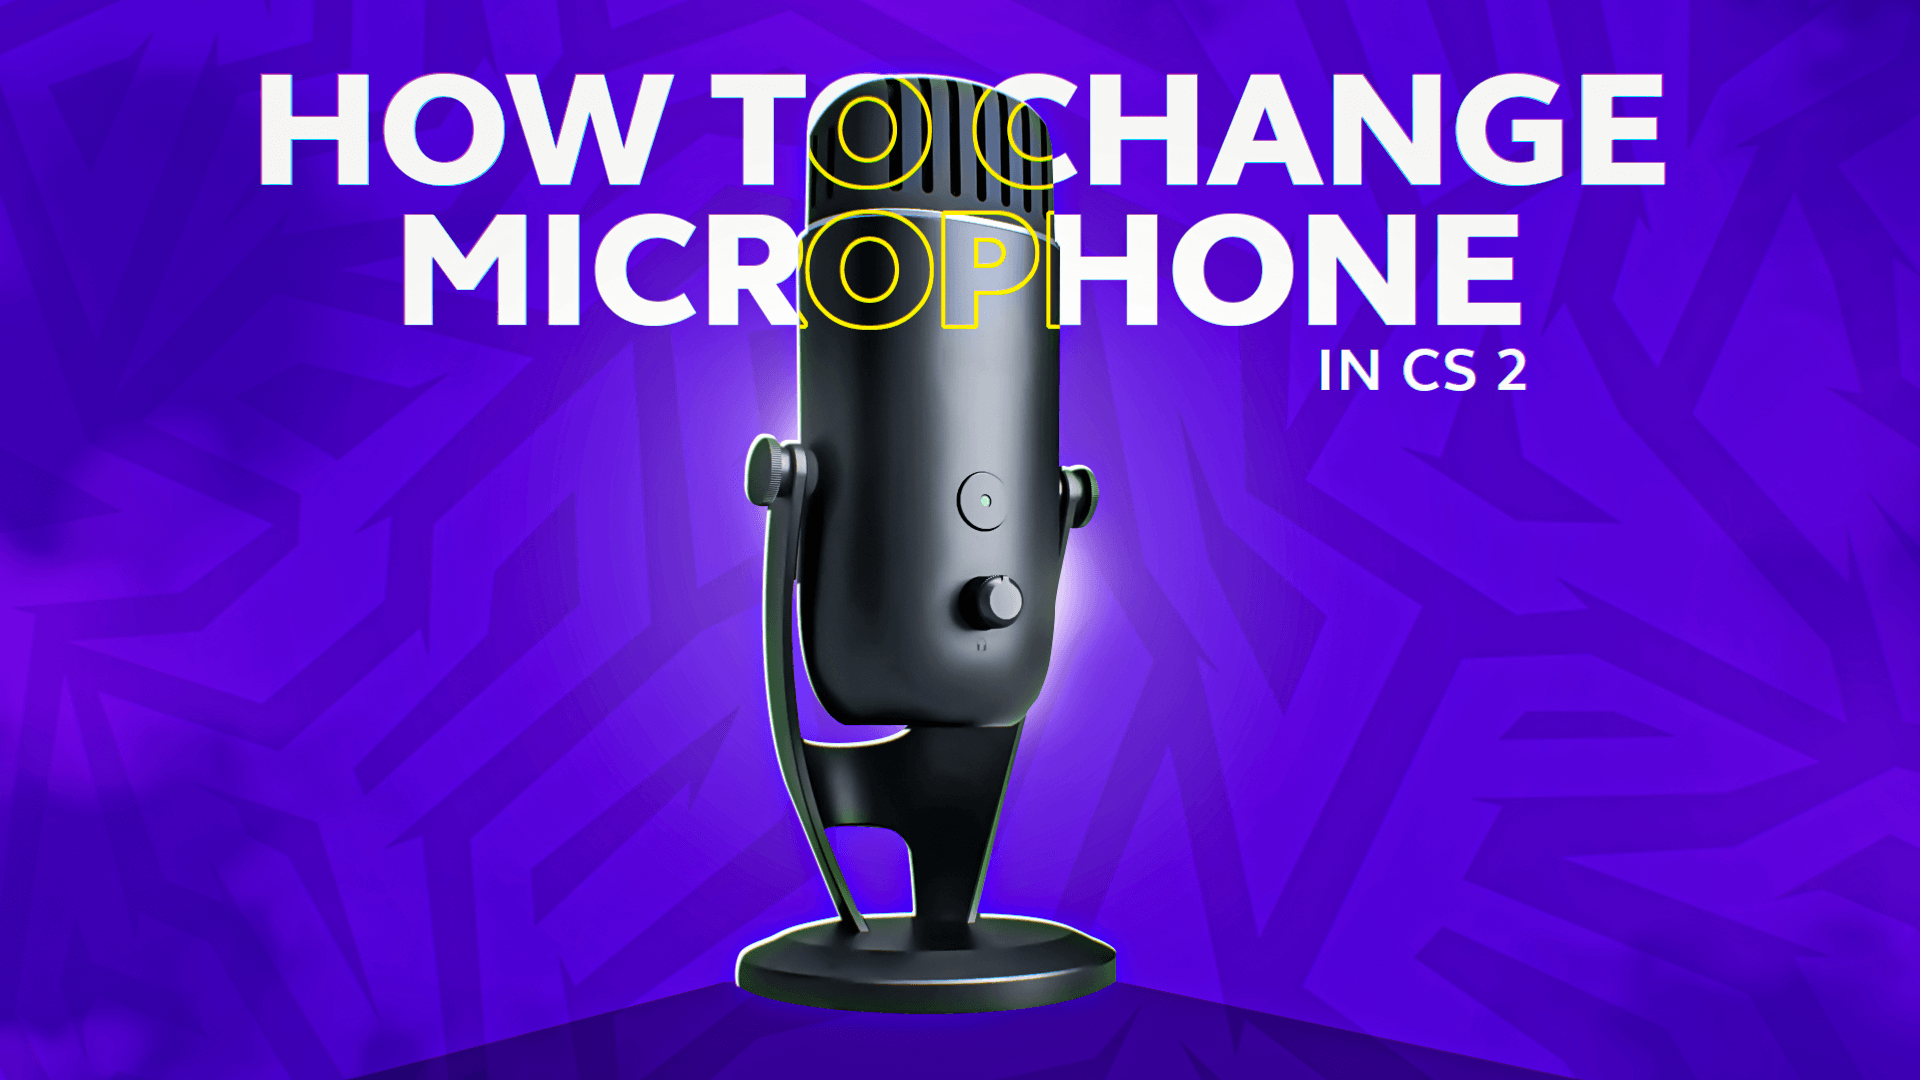 How to Change Microphone in CS2